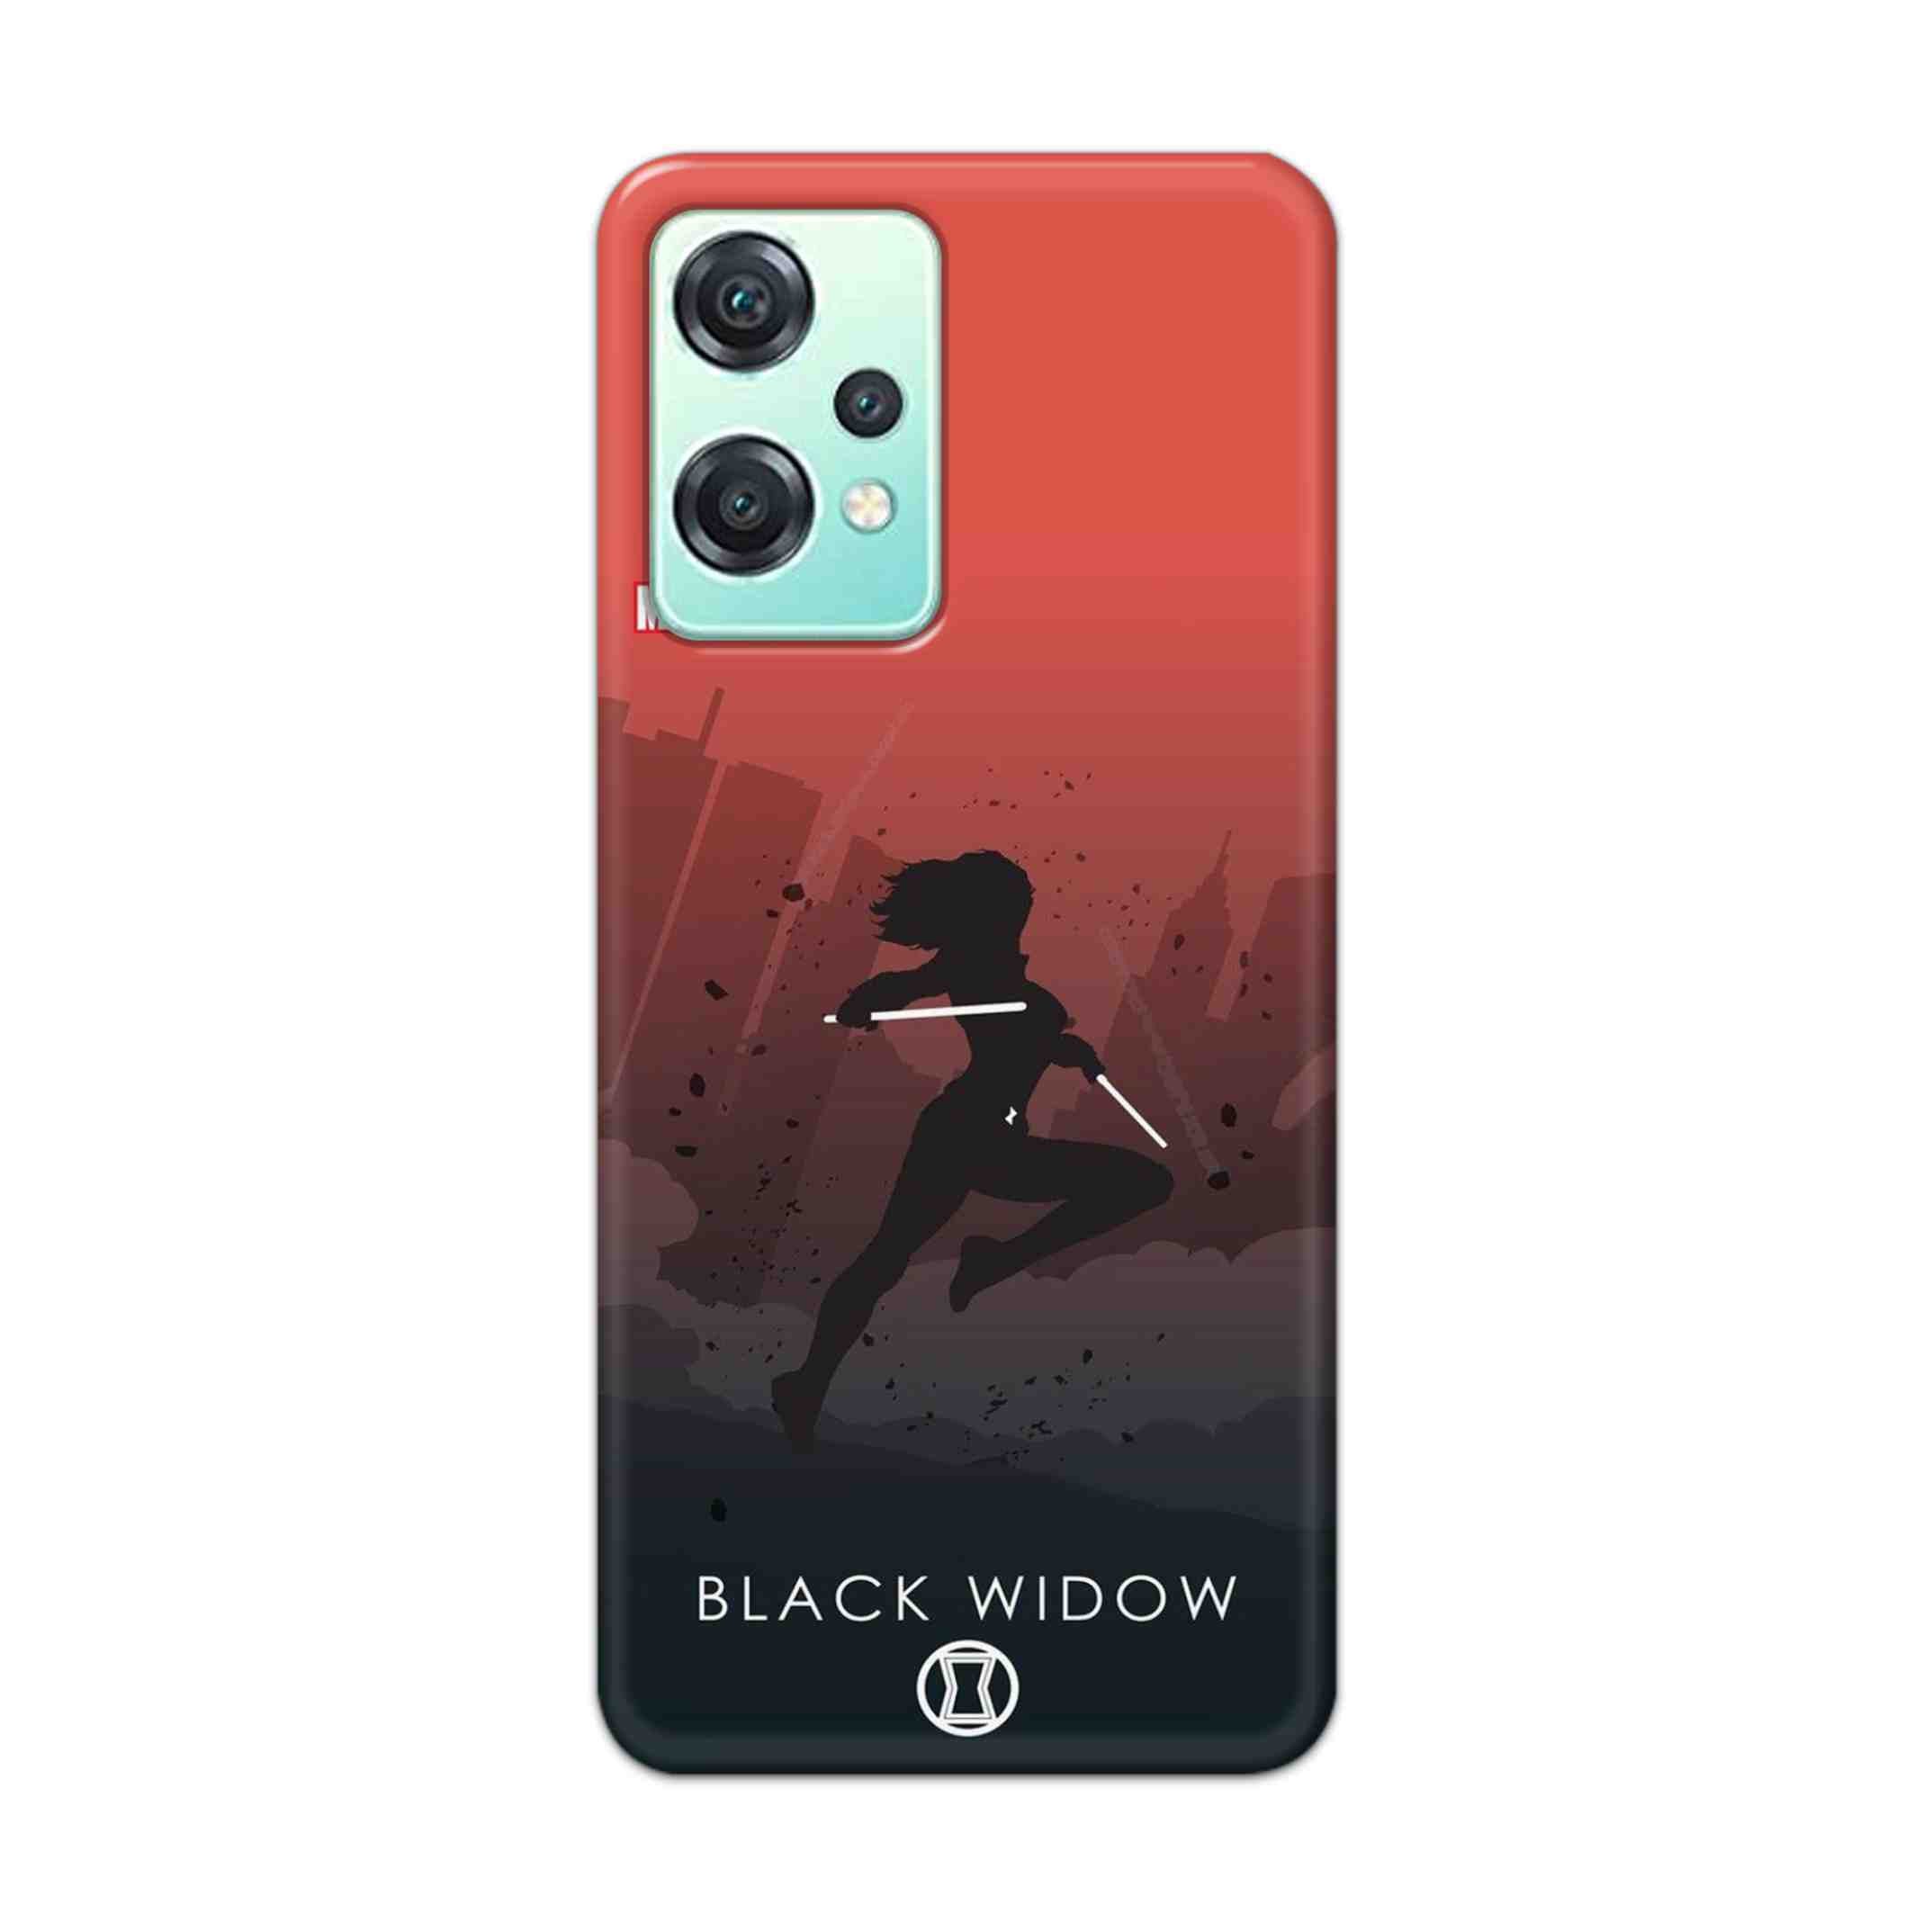 Buy Black Widow Hard Back Mobile Phone Case Cover For OnePlus Nord CE 2 Lite 5G Online